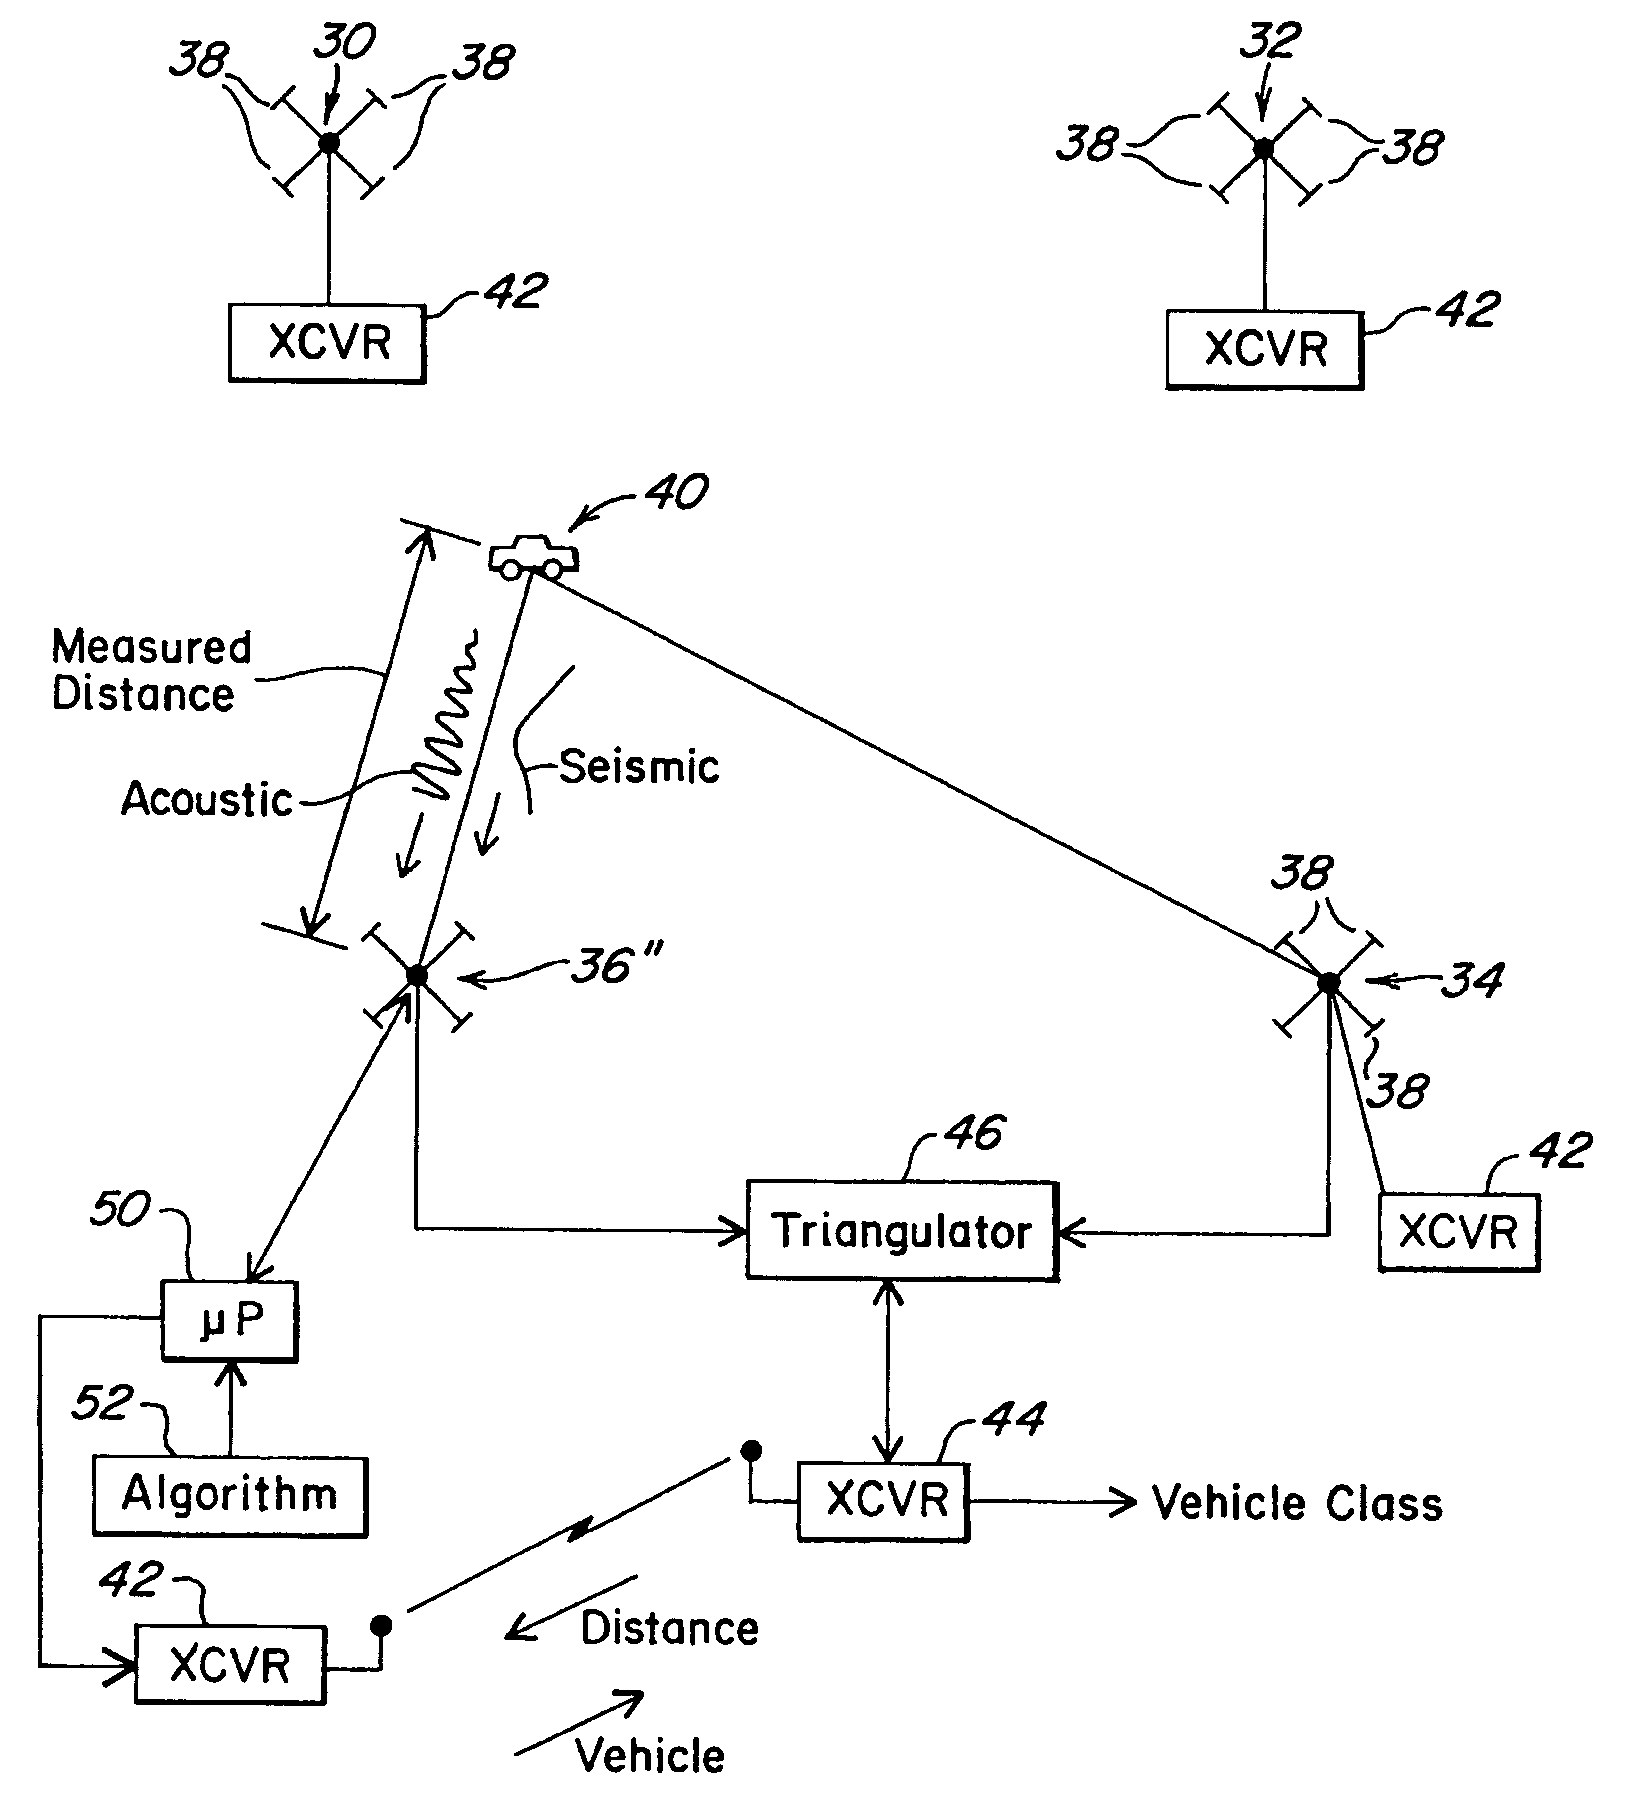 Passive real-time vehicle classification system utilizing unattended ground sensors